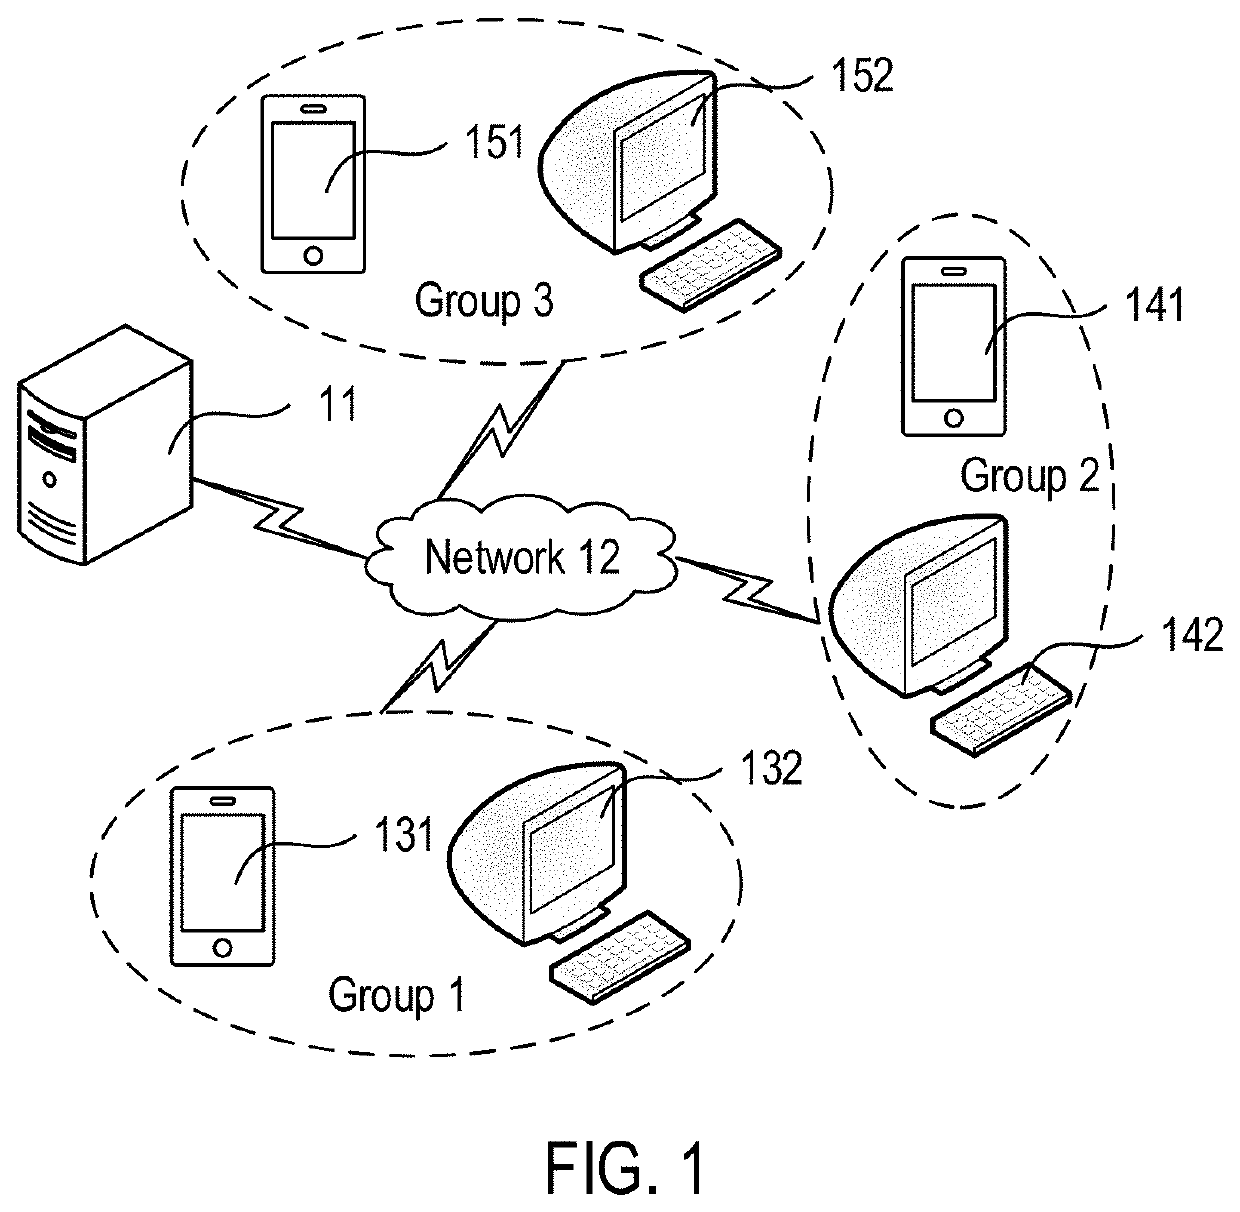 Method and apparatus for sharing data across groups